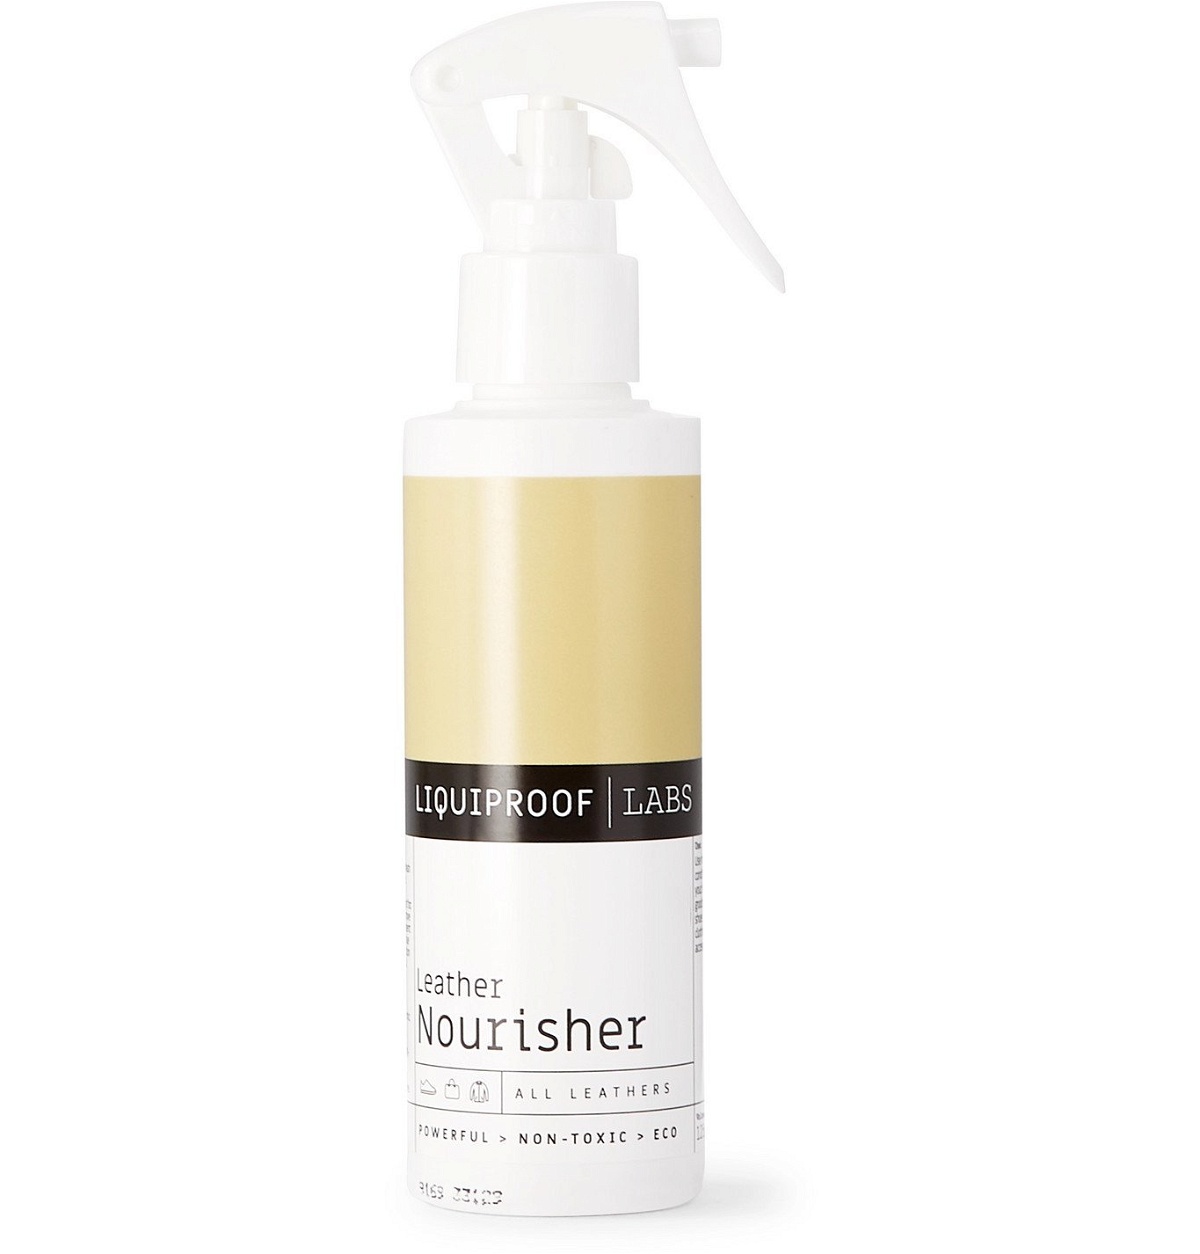 Photo: Liquiproof LABS - Leather Nourisher, 125ml - Colorless